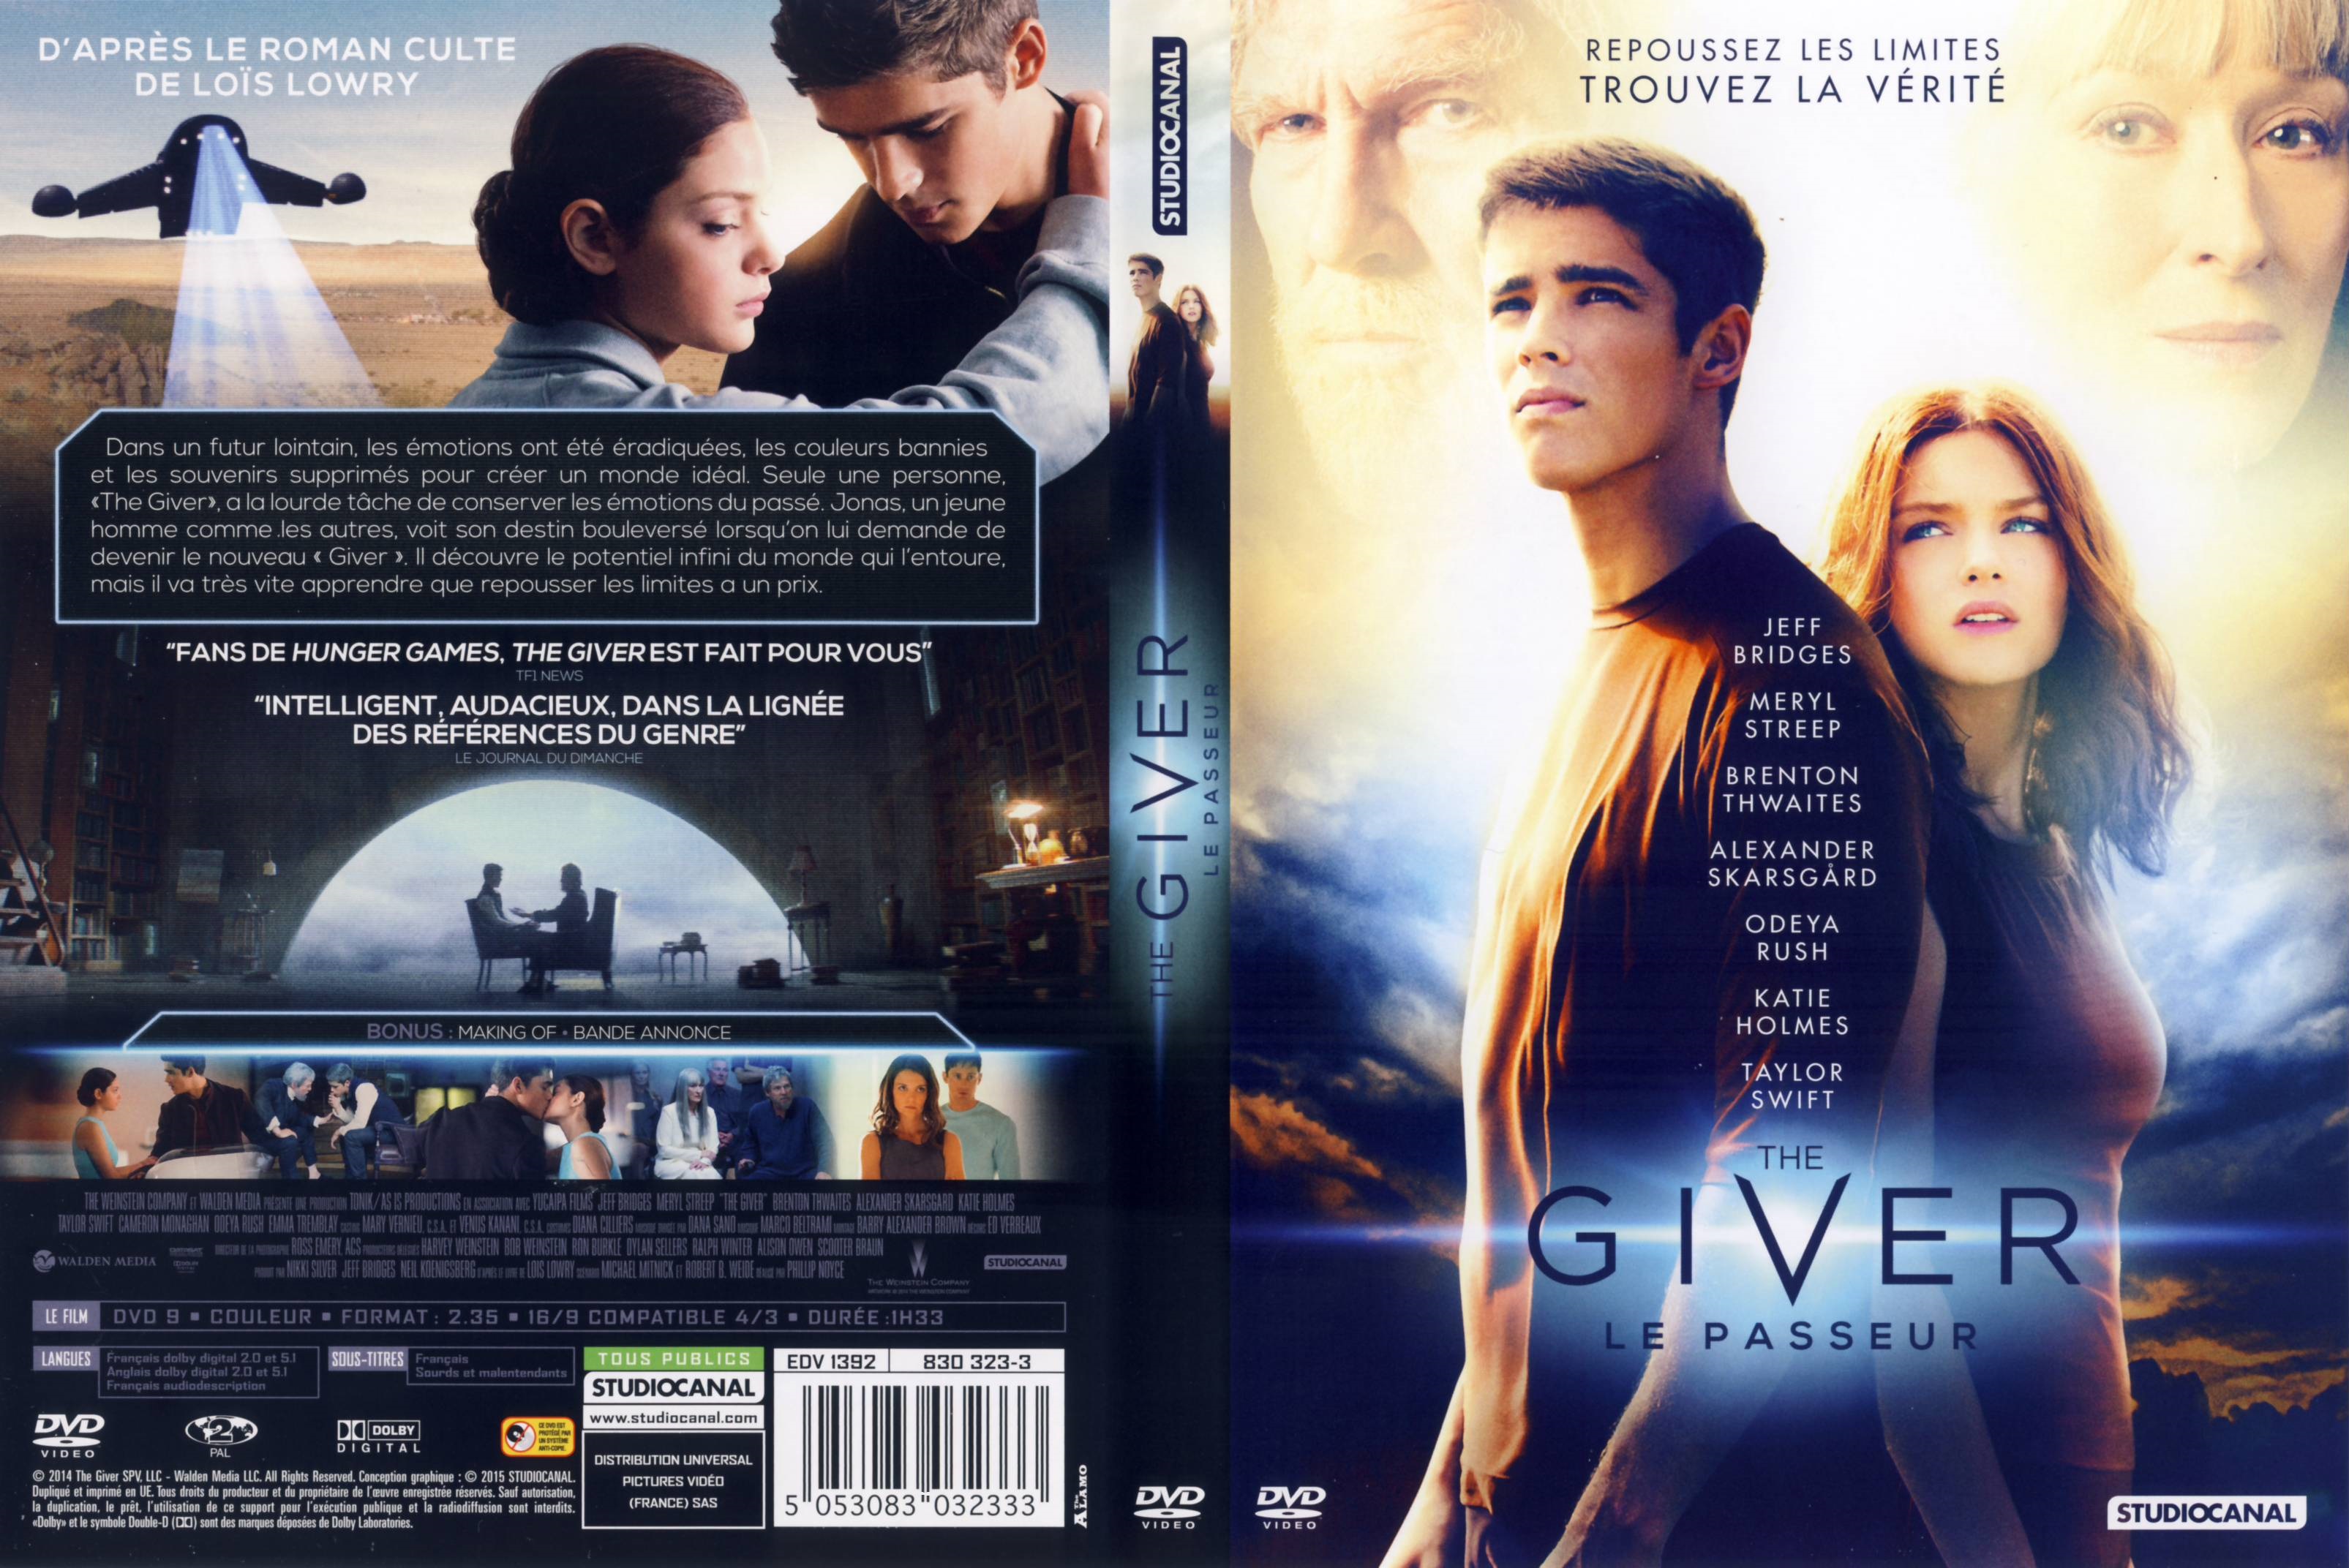 Jaquette DVD The Giver